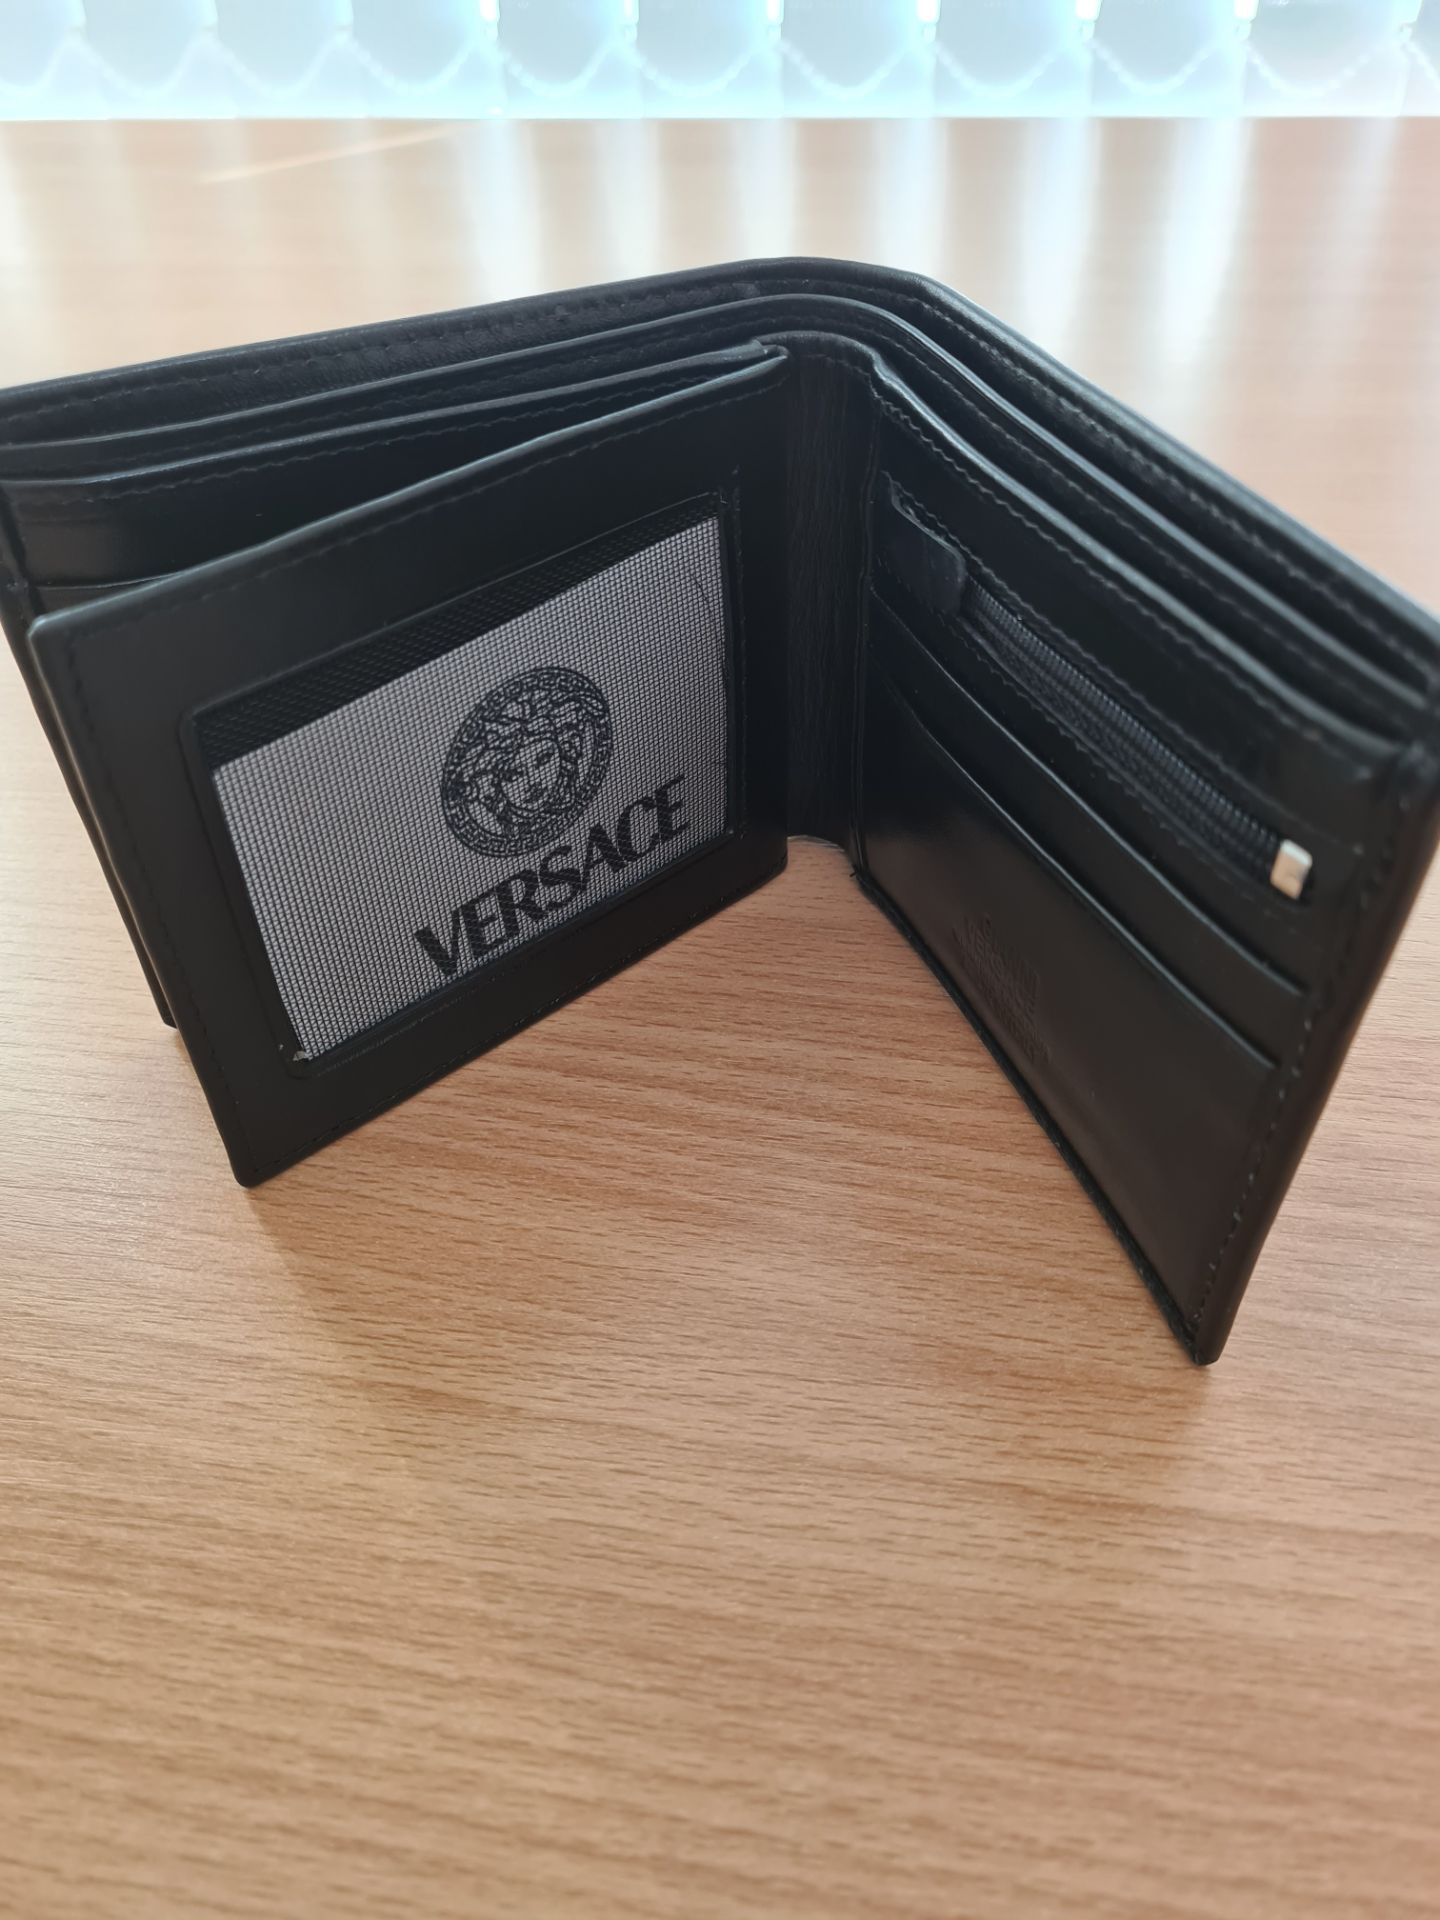 versace men's leather wallet - new with box - Image 4 of 8